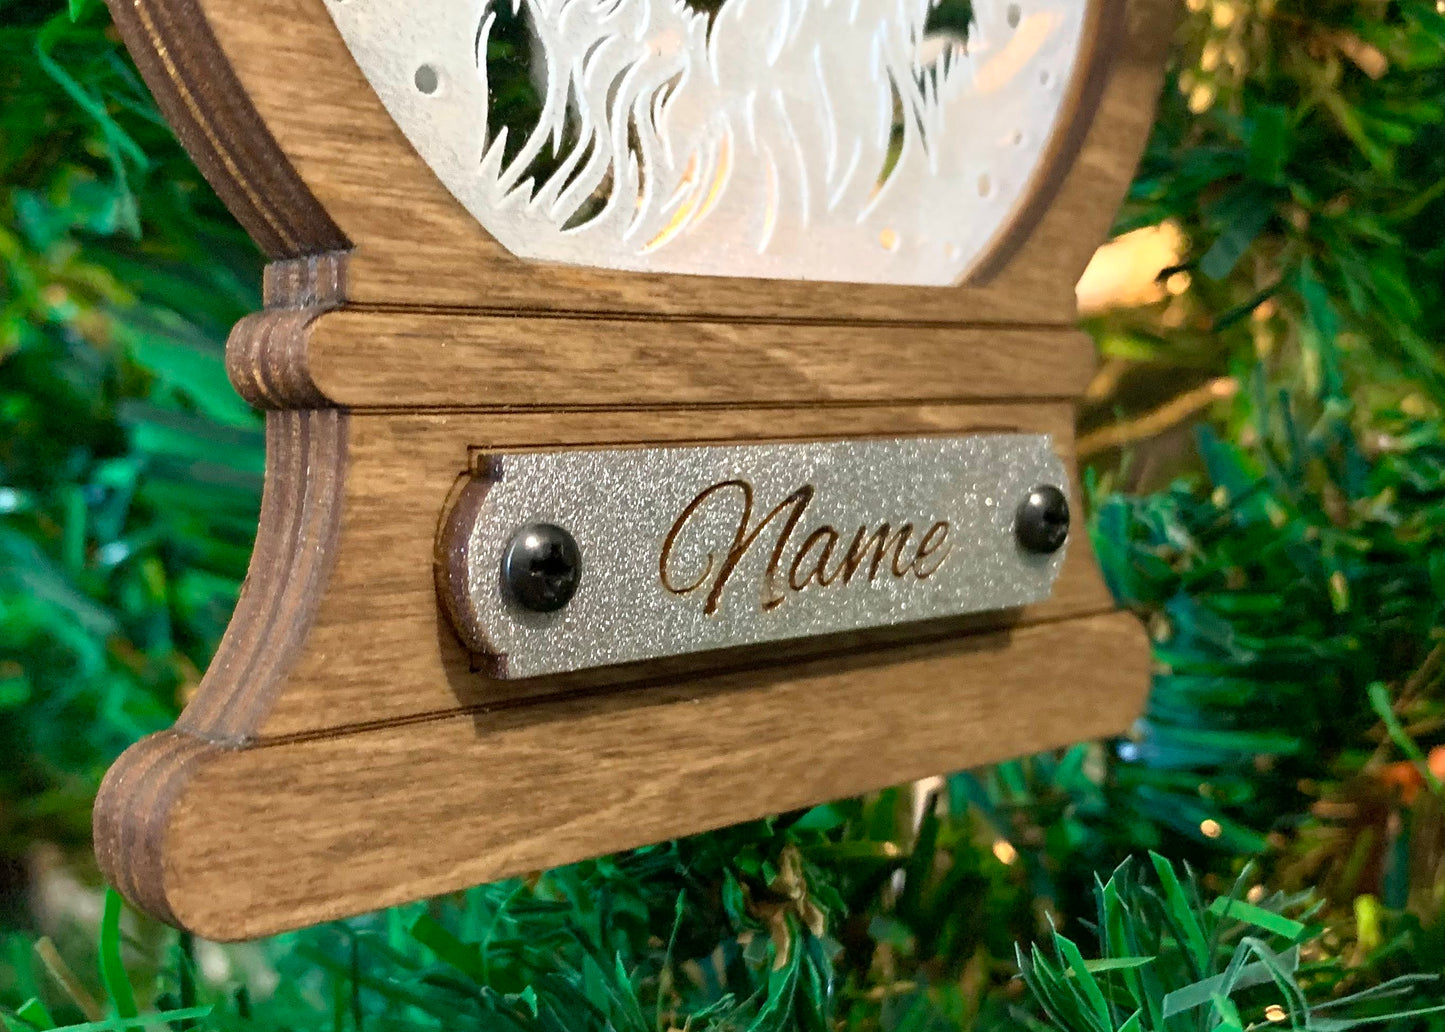 Personalized Acrylic and Wood Cat Snowglobe Ornaments